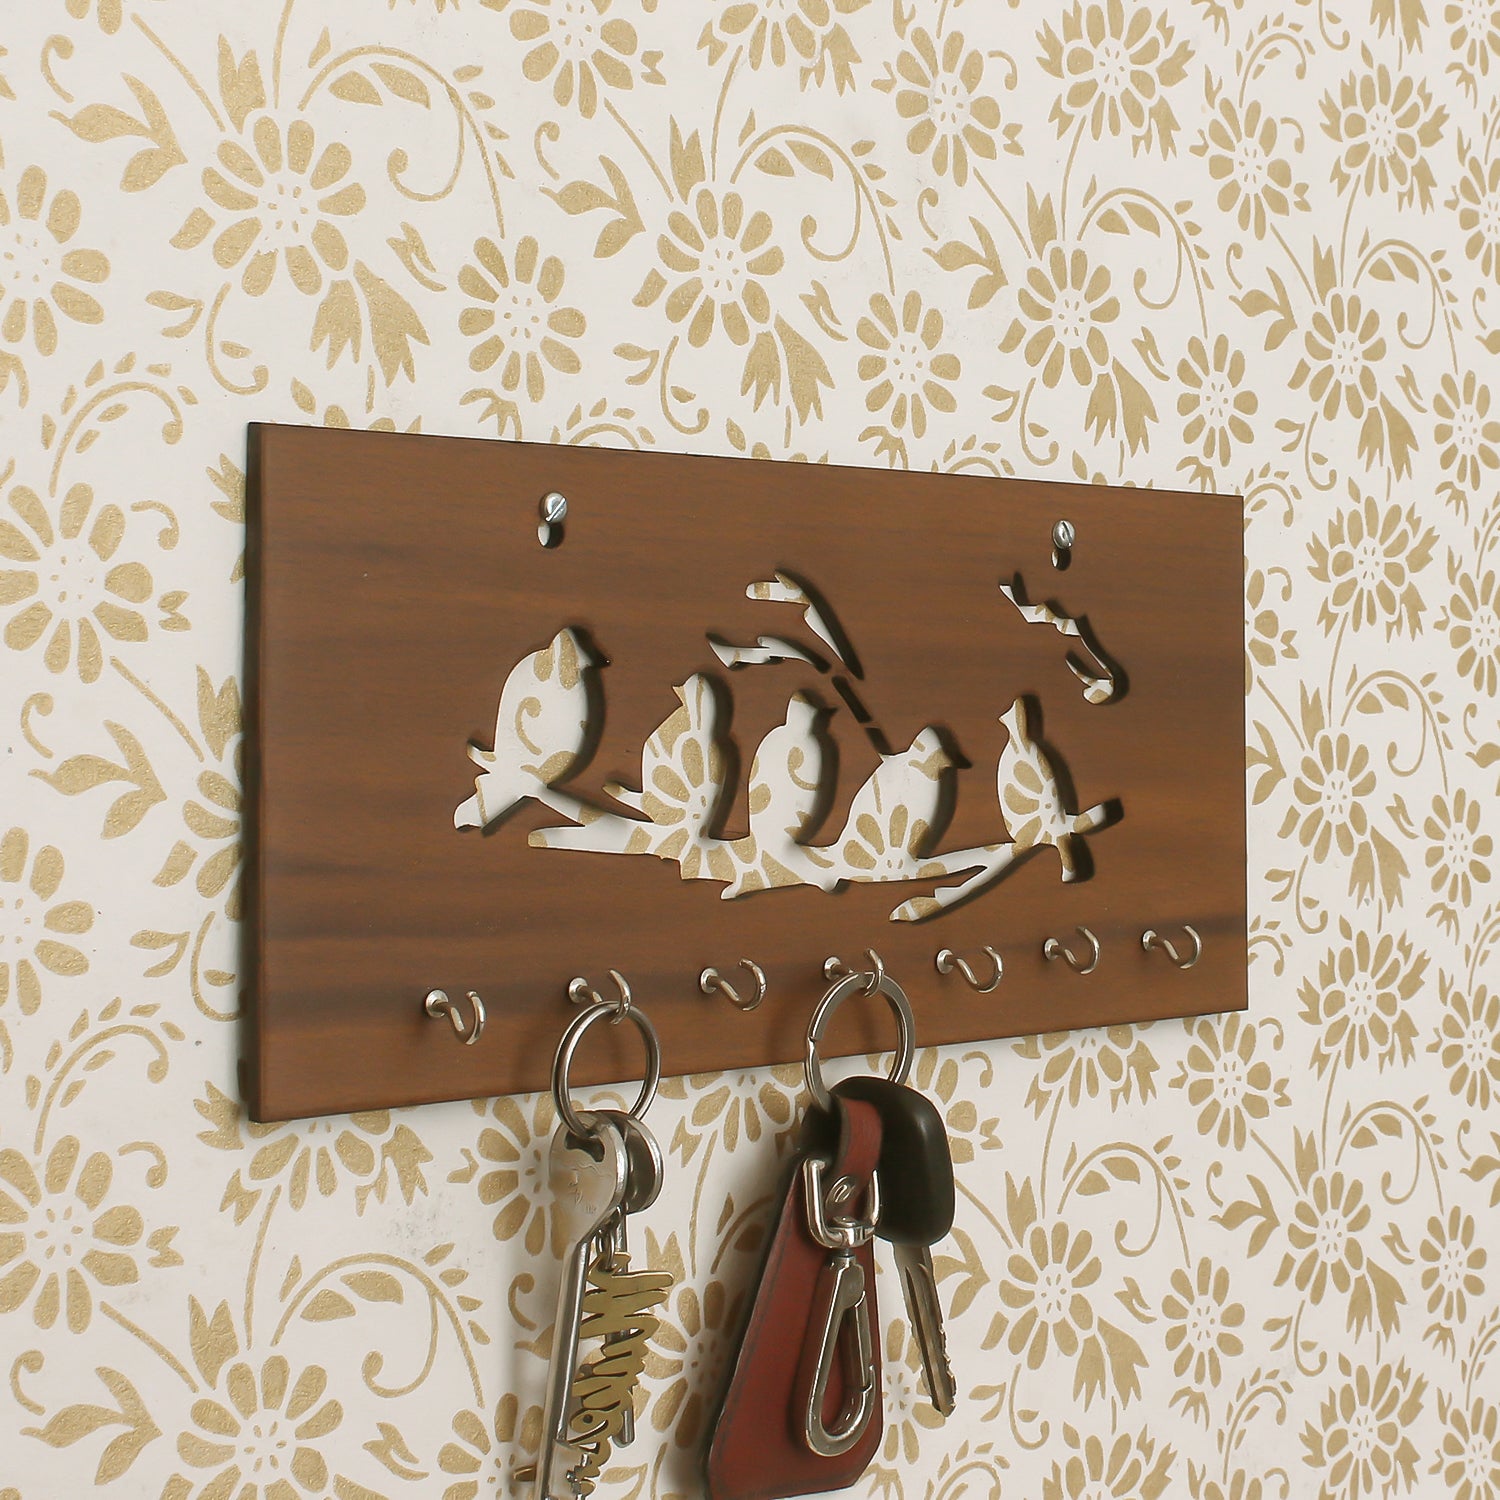 Brown Birds on Branches Theme Wooden Key Holder with 7 Hooks